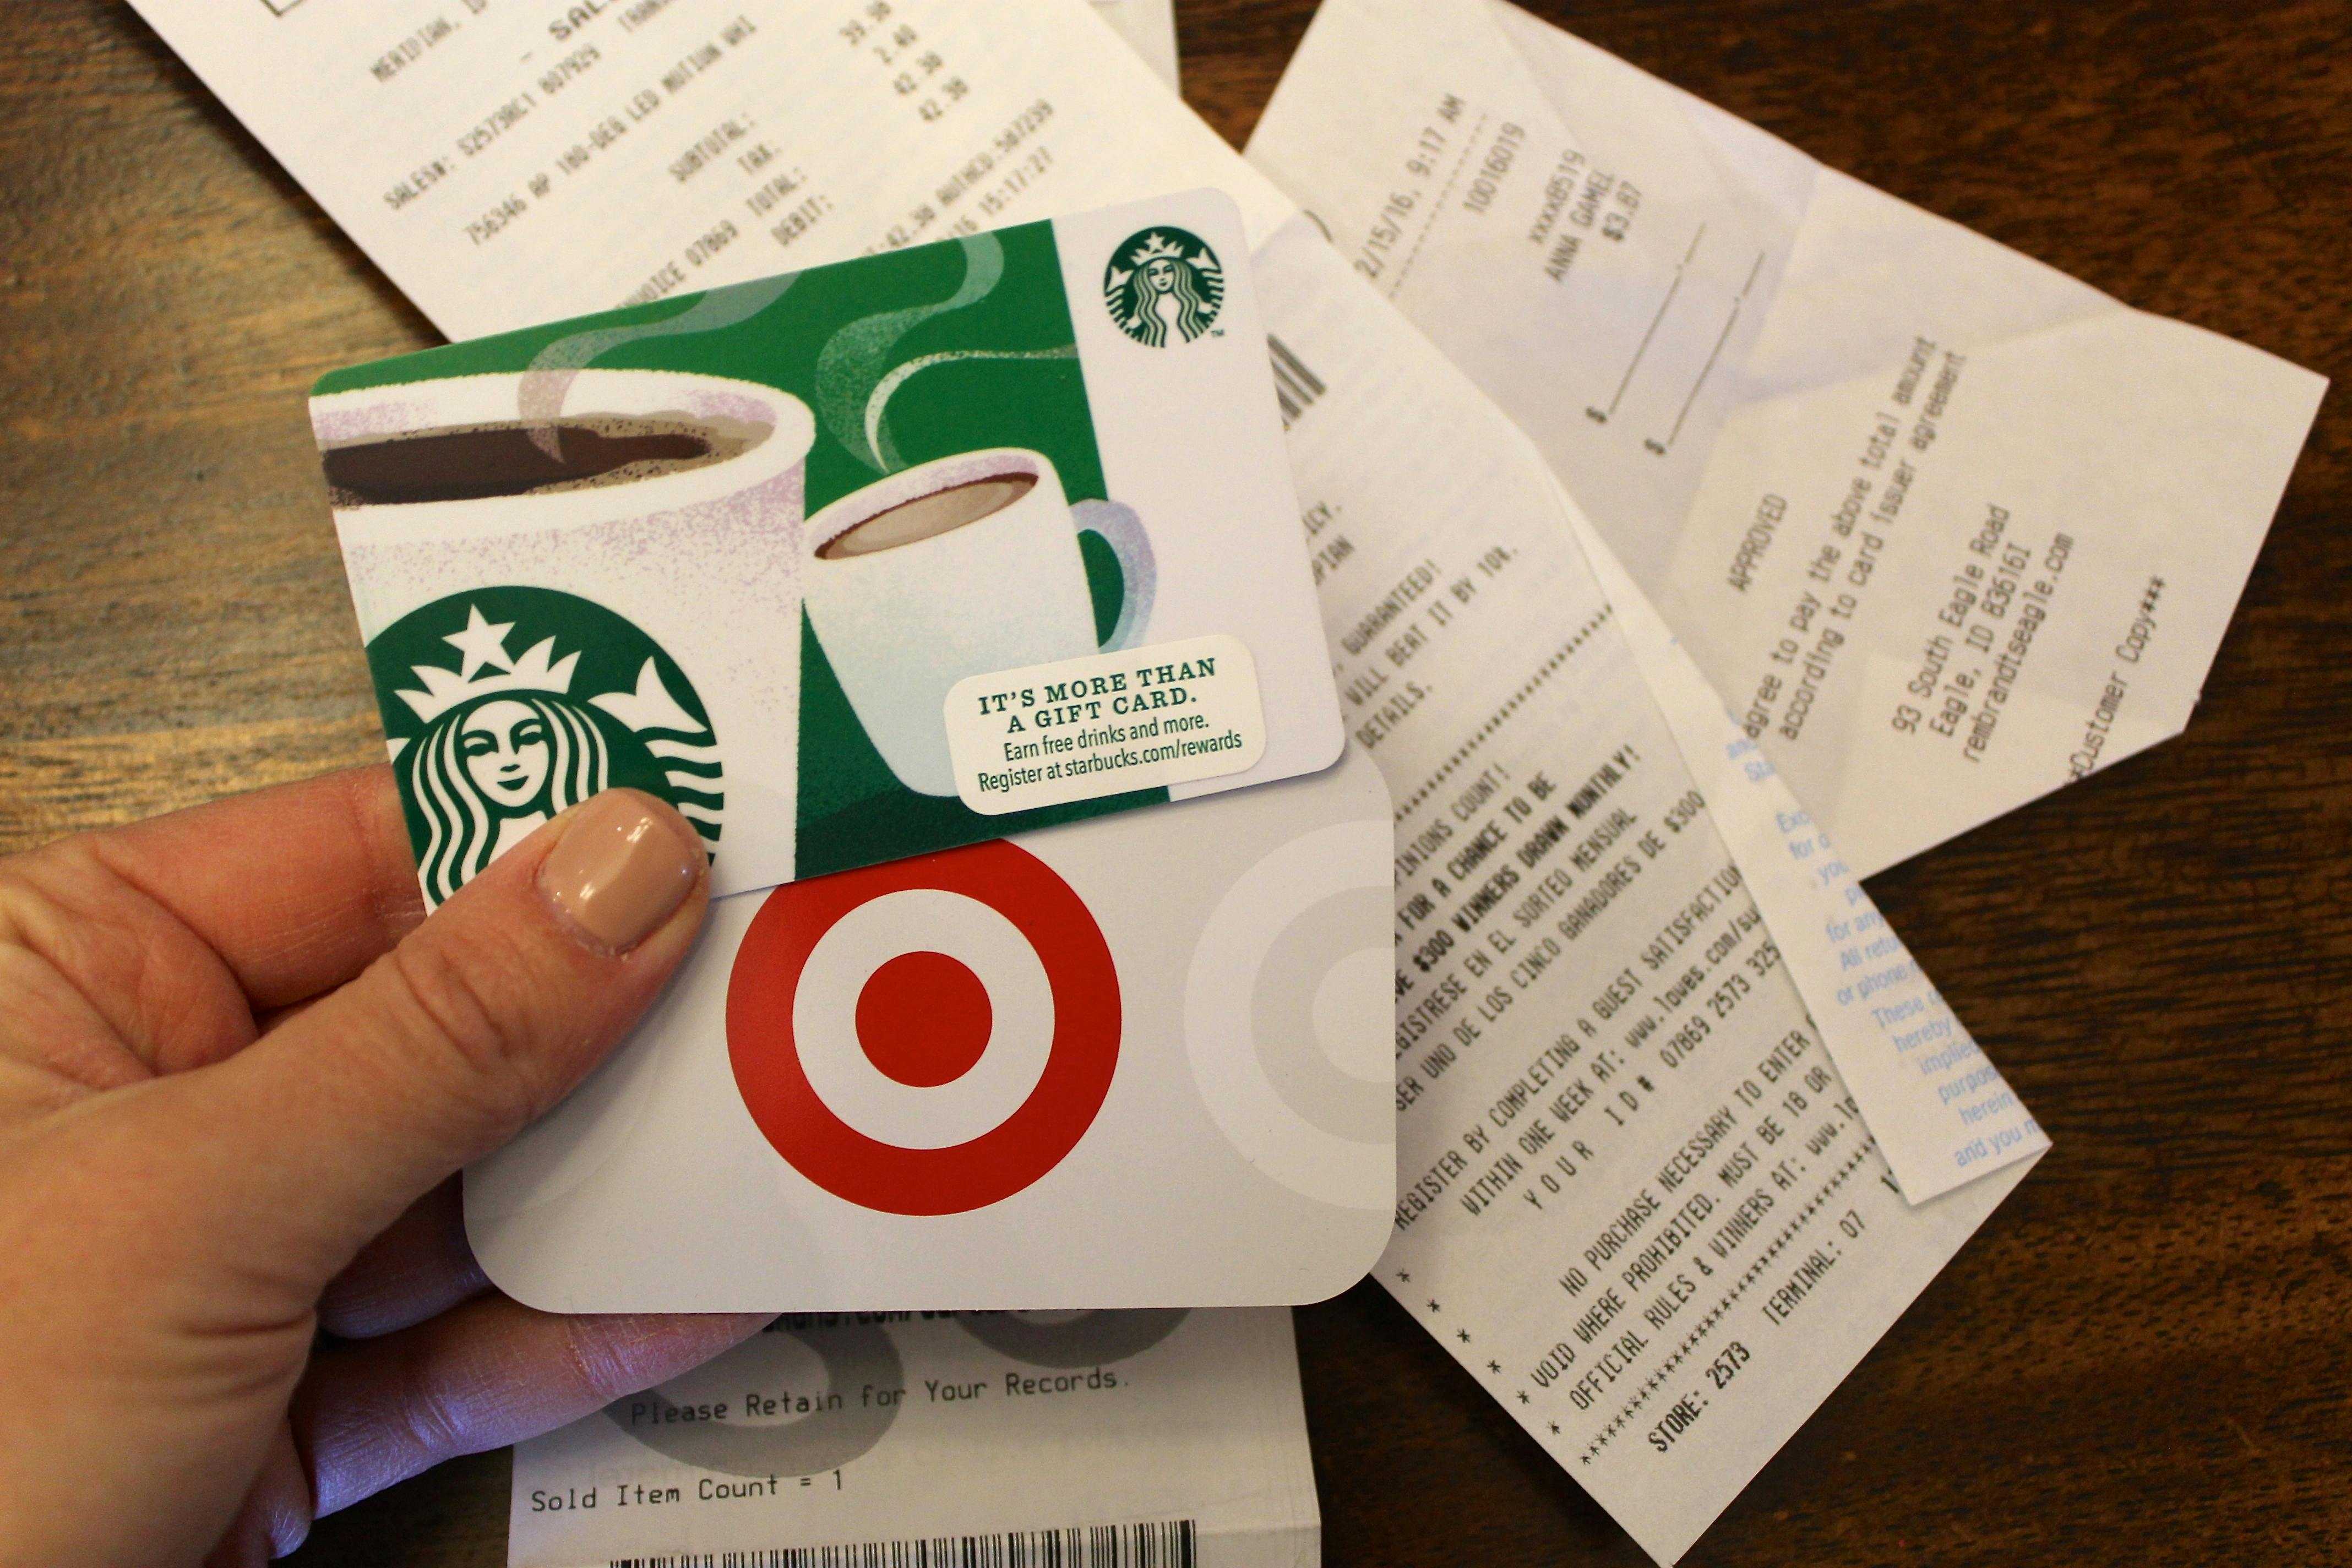 A person holding a Target and a Starbucks gift cards in their hand in front of two receipts on a table.